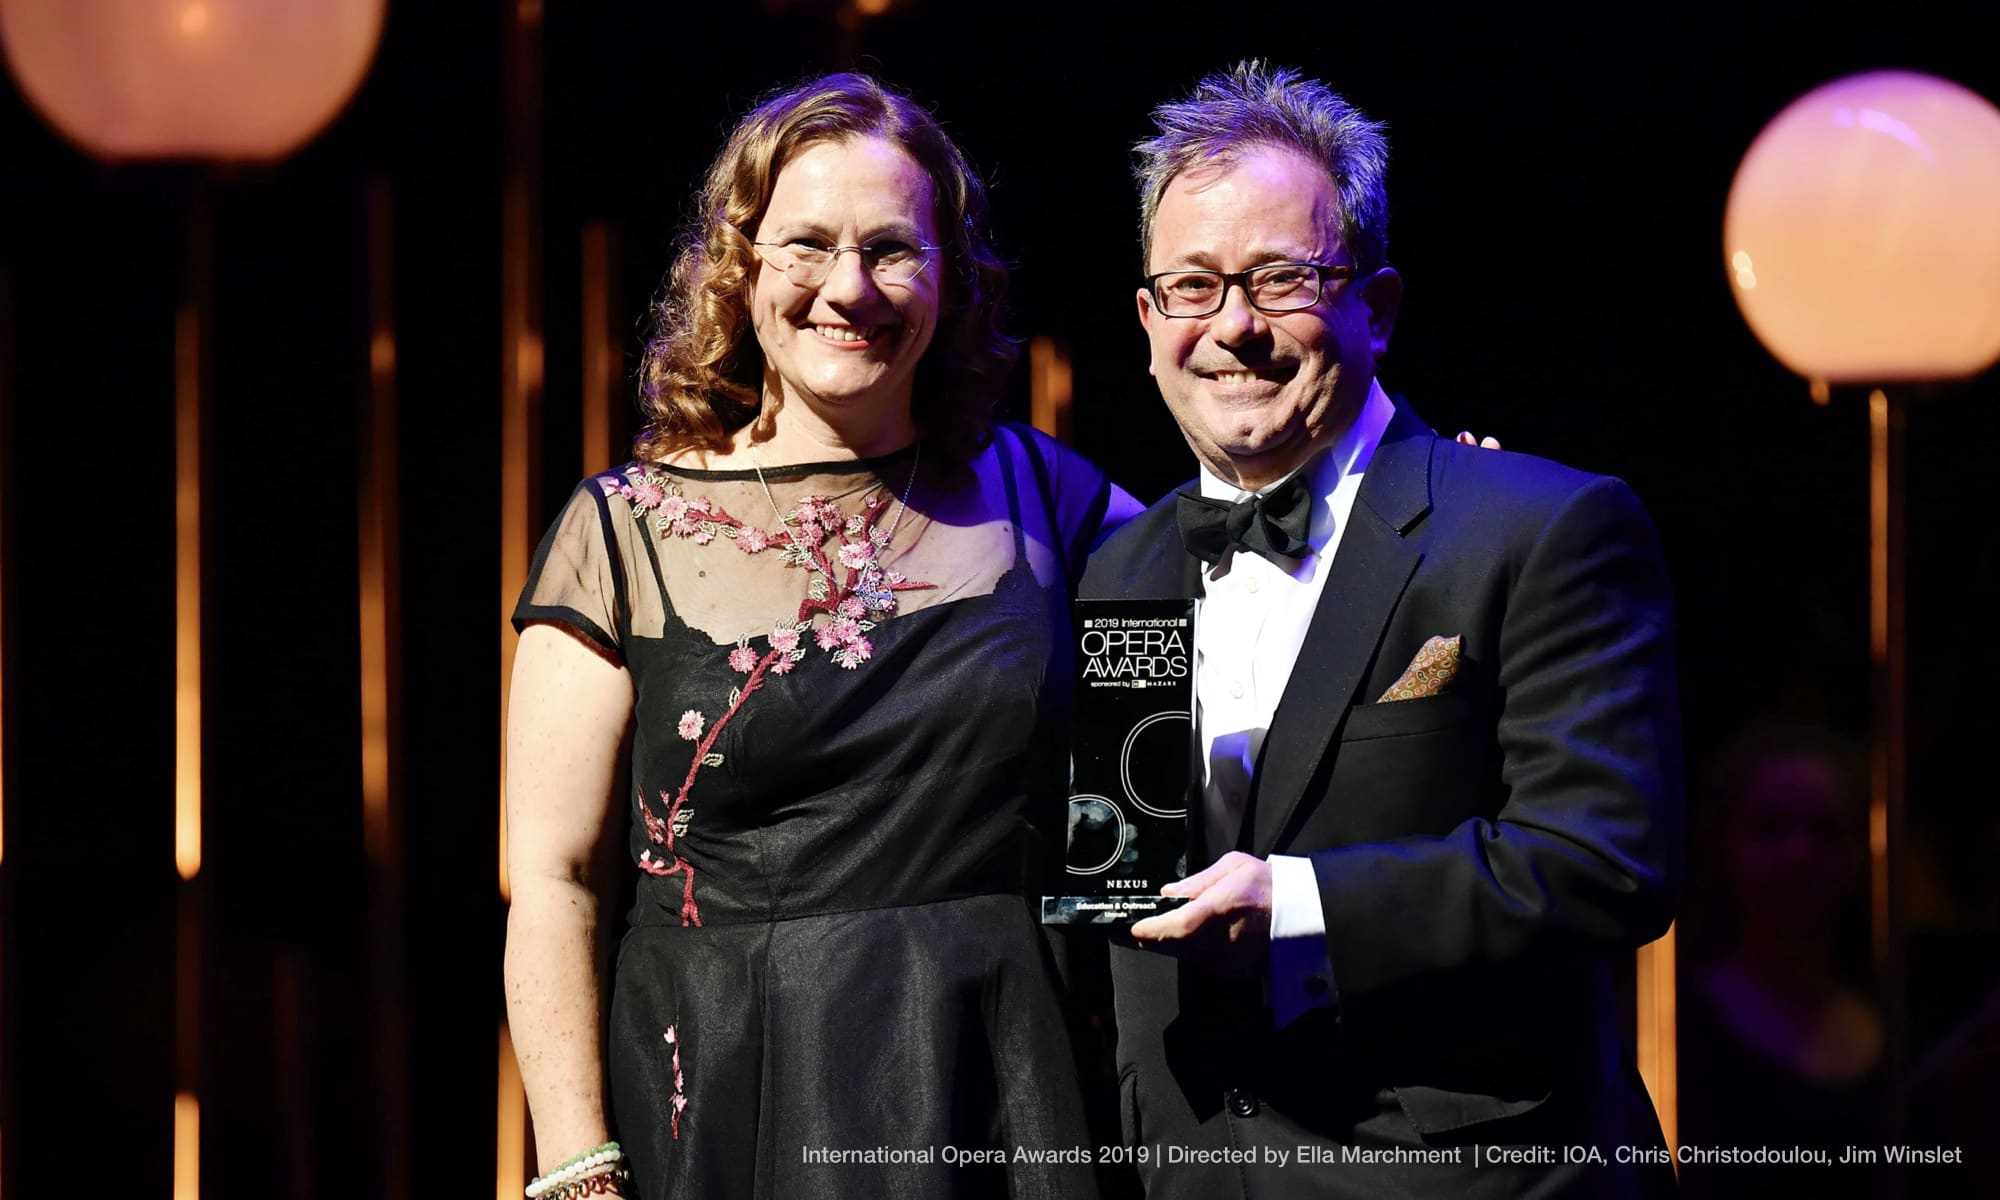 International Opera Awards 2019 Directed by Ella Marchment